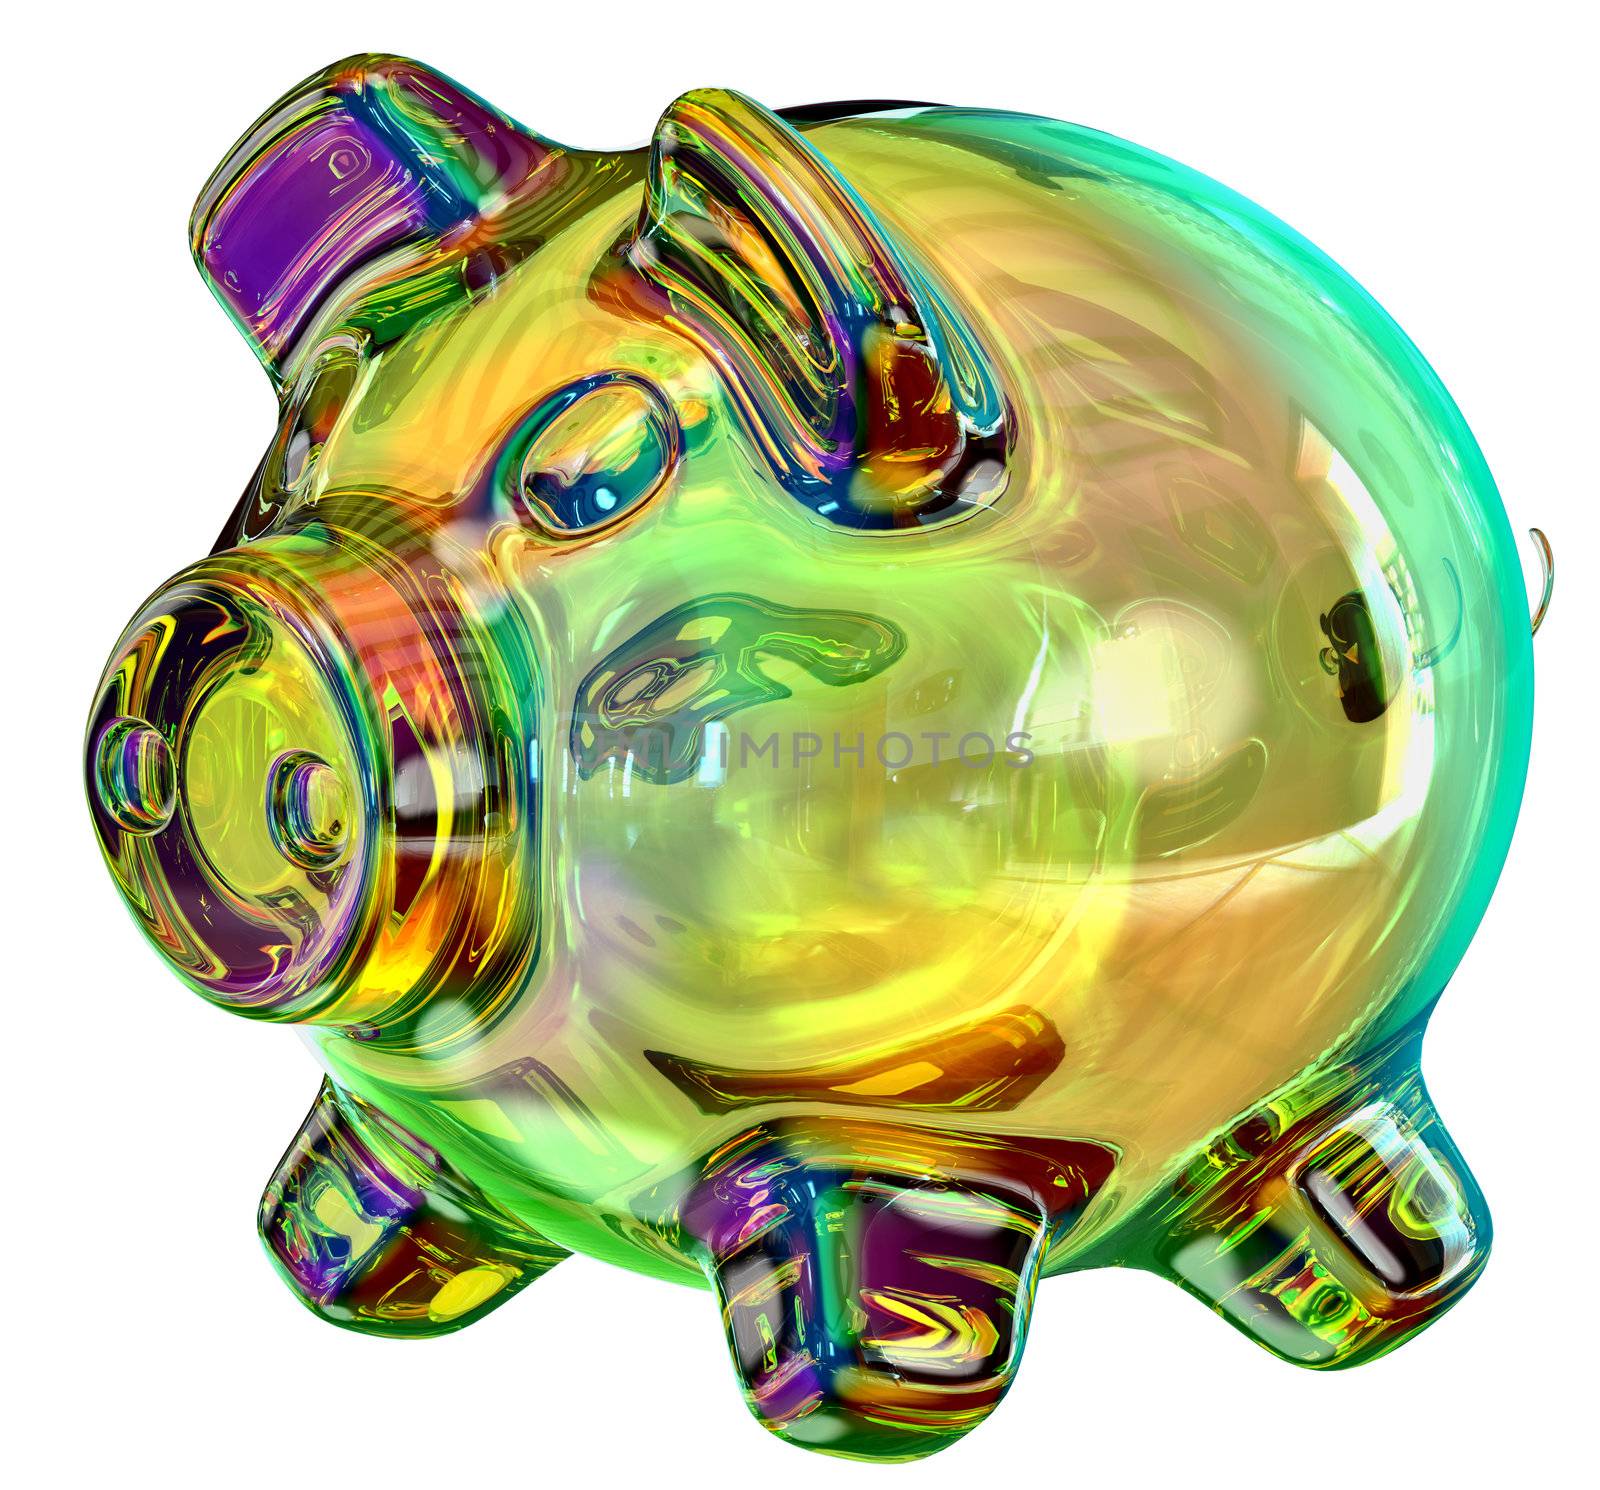 money-box in the form of a colored glass piggy bank as a symbol of the accumulation